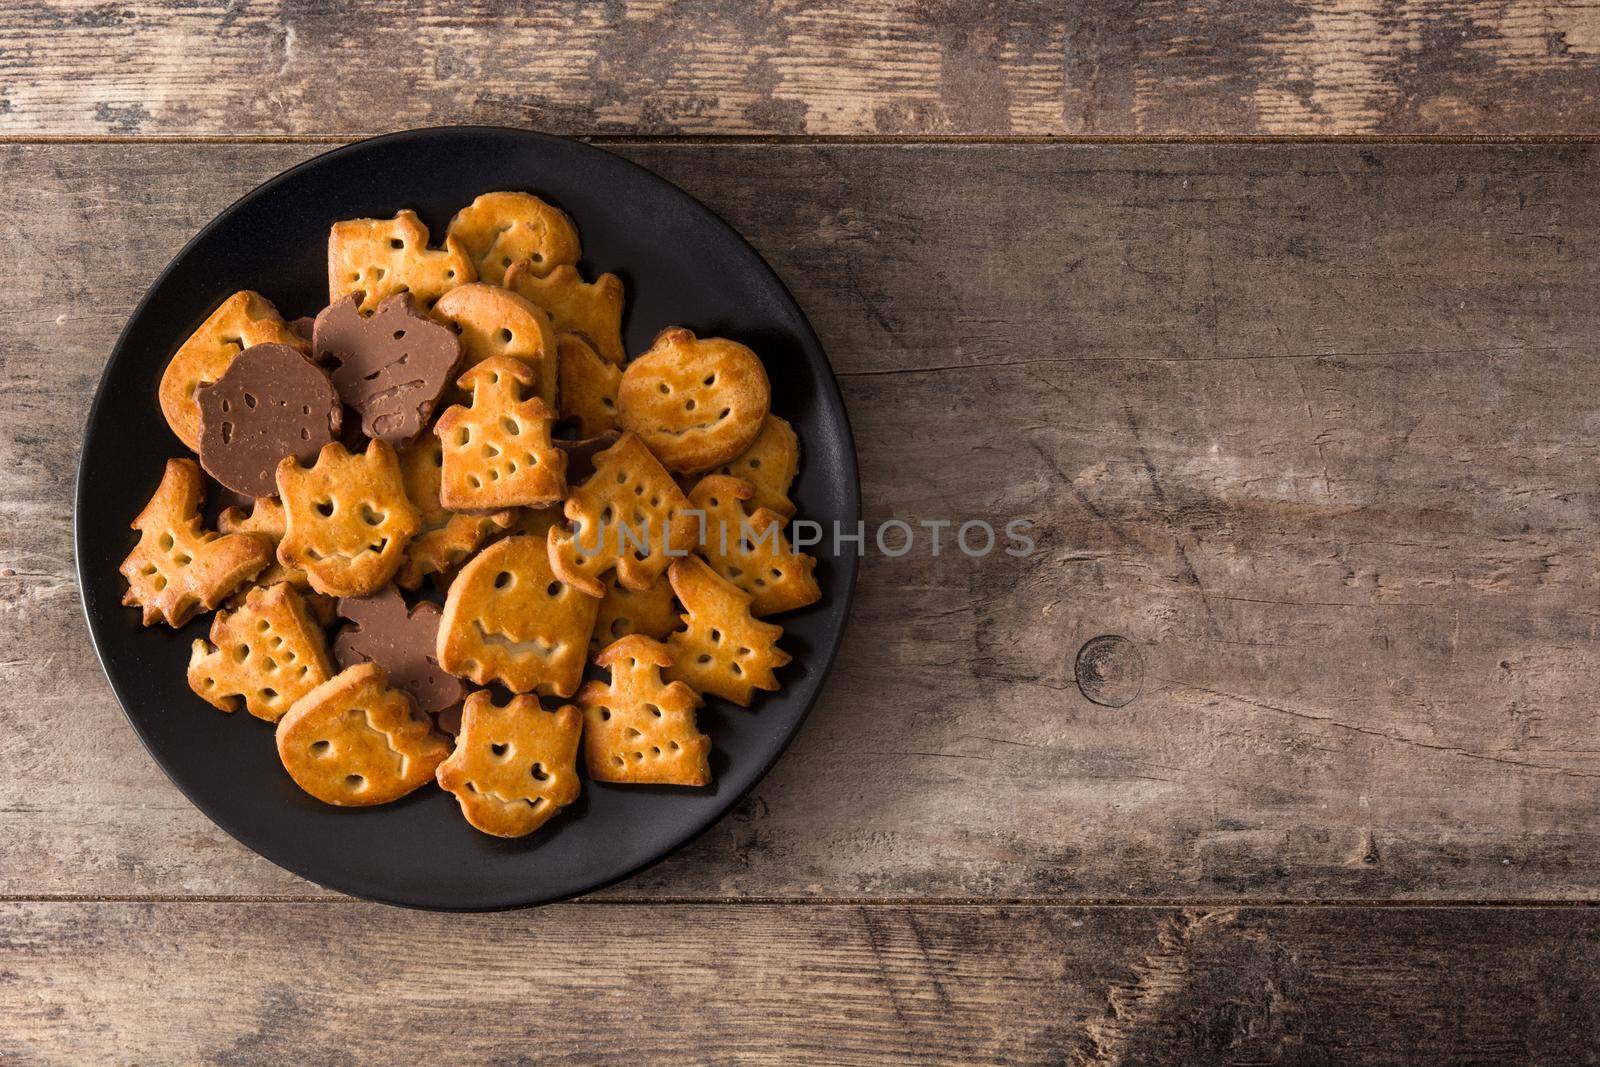 Funny Halloween cookies on wooden table